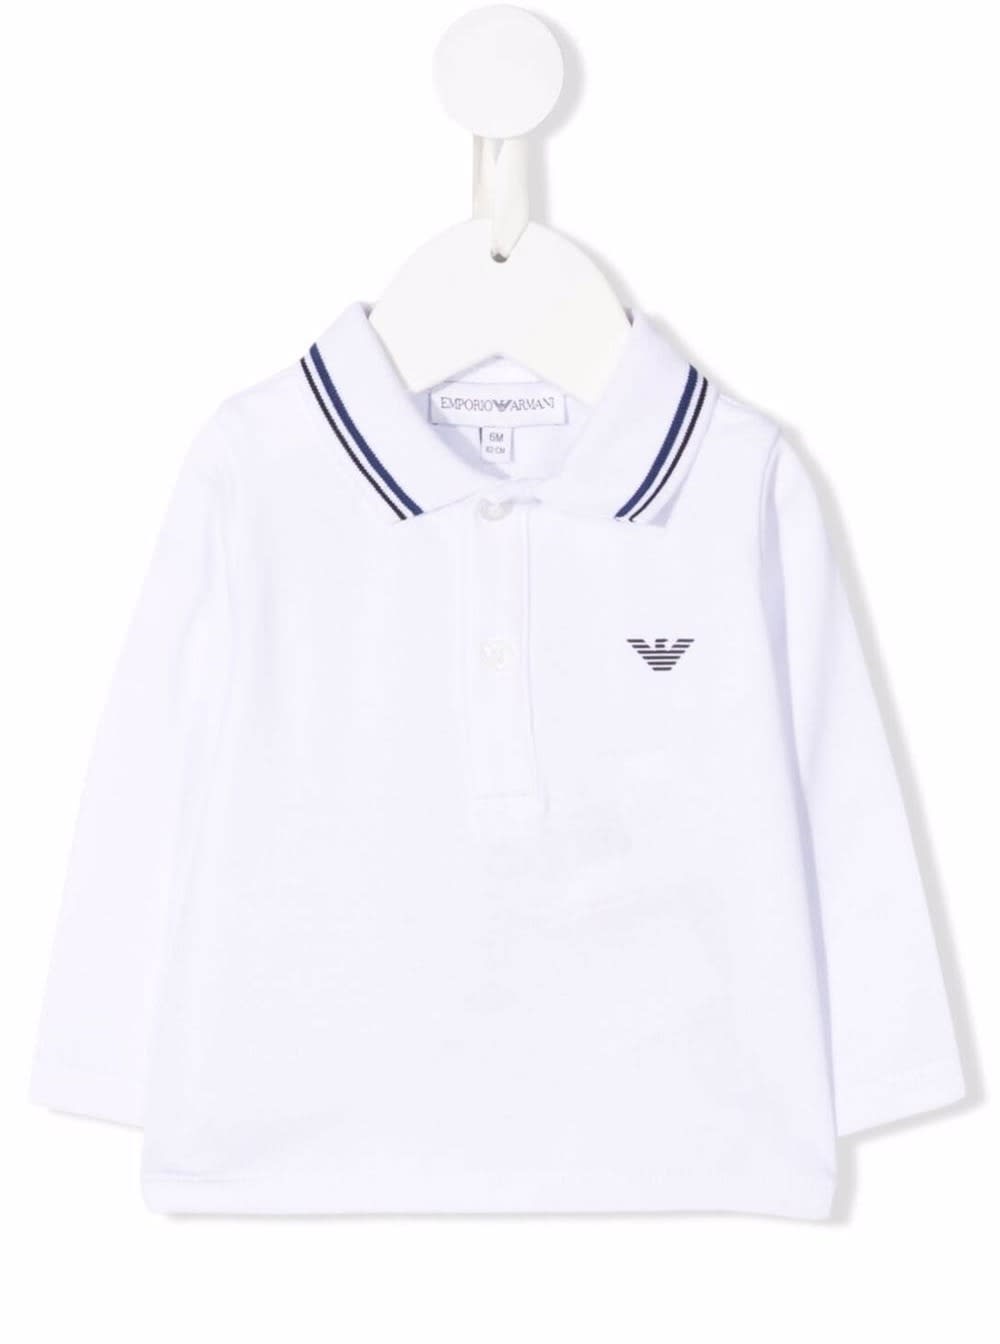 EMPORIO ARMANI WHITE POLO SHIRT WITH LOGO PRINT AND STRIPE DETAIL ON COLLAR IN STRETCH COTTON BABY